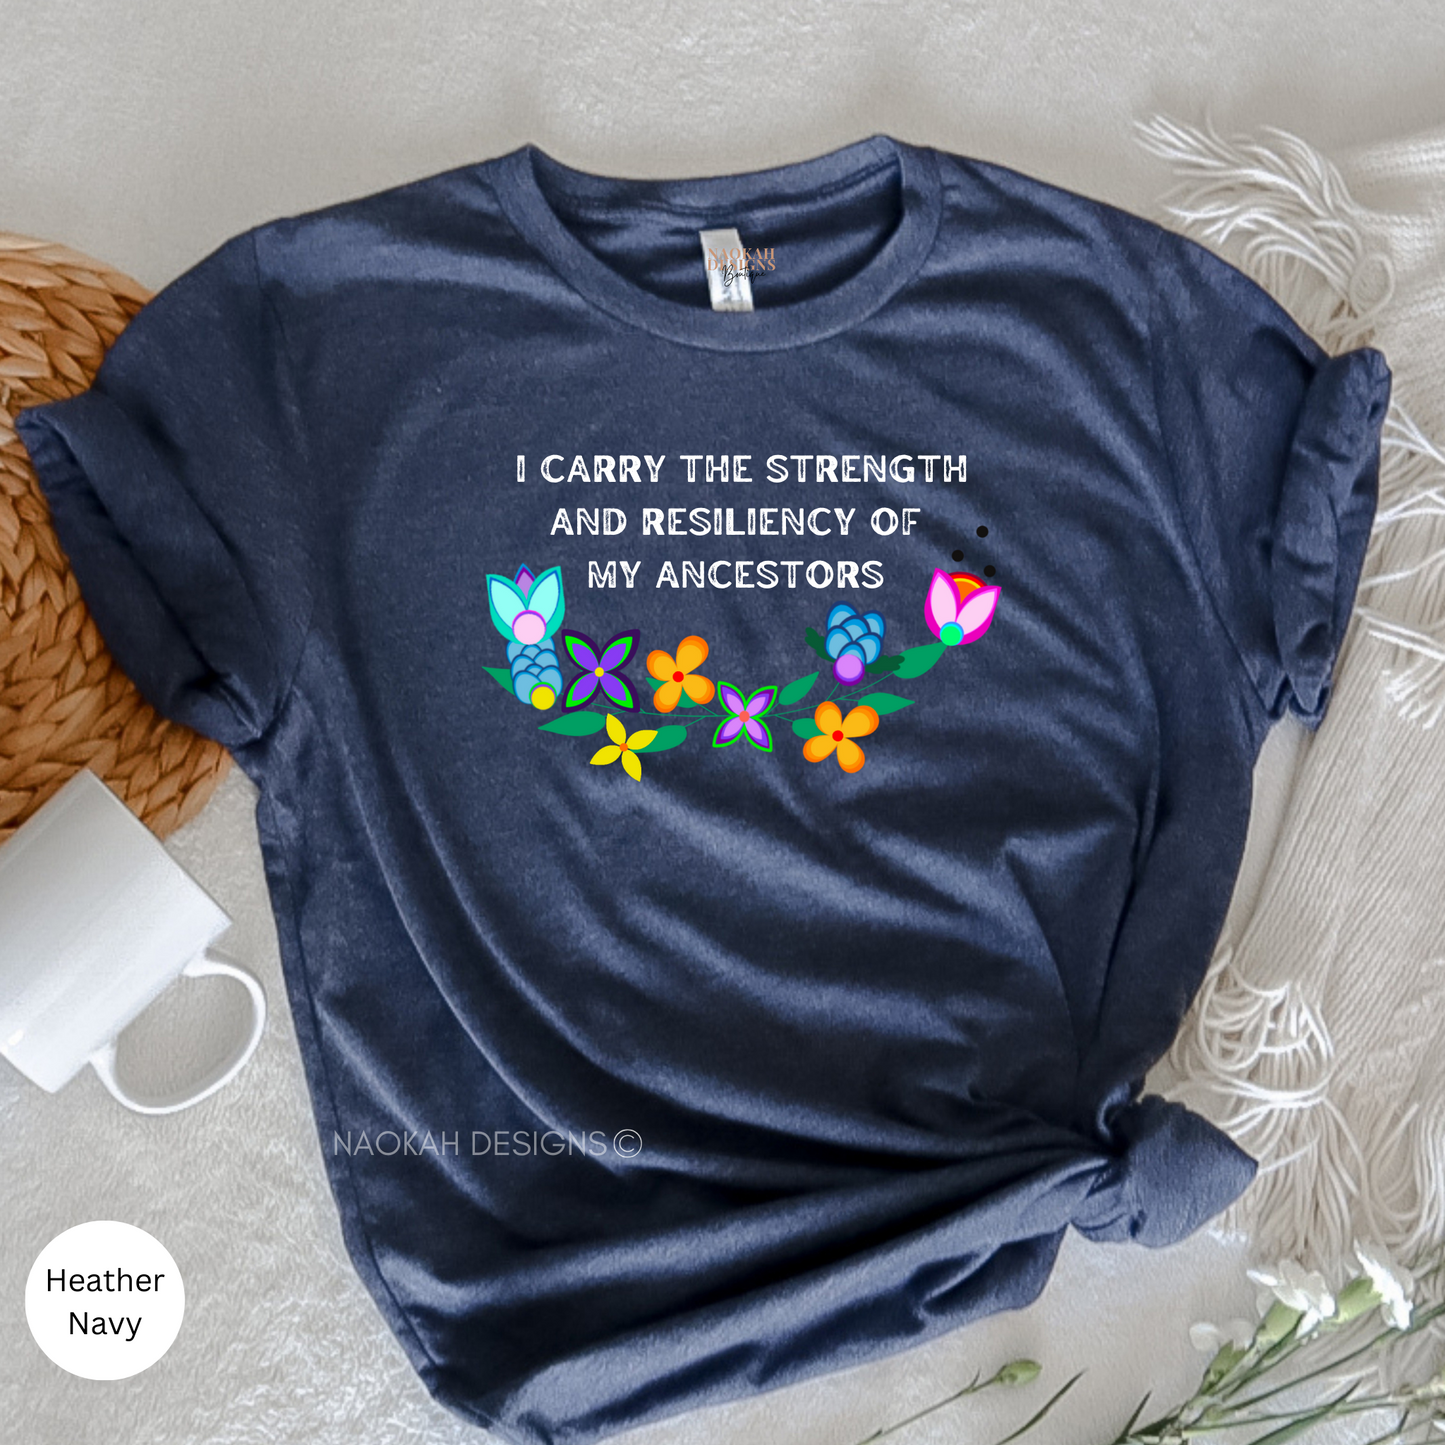 i carry the strength and resiliency of my ancestors shirt, indigenous floral shirt, ancestors shirt, making ancestors proud shirt